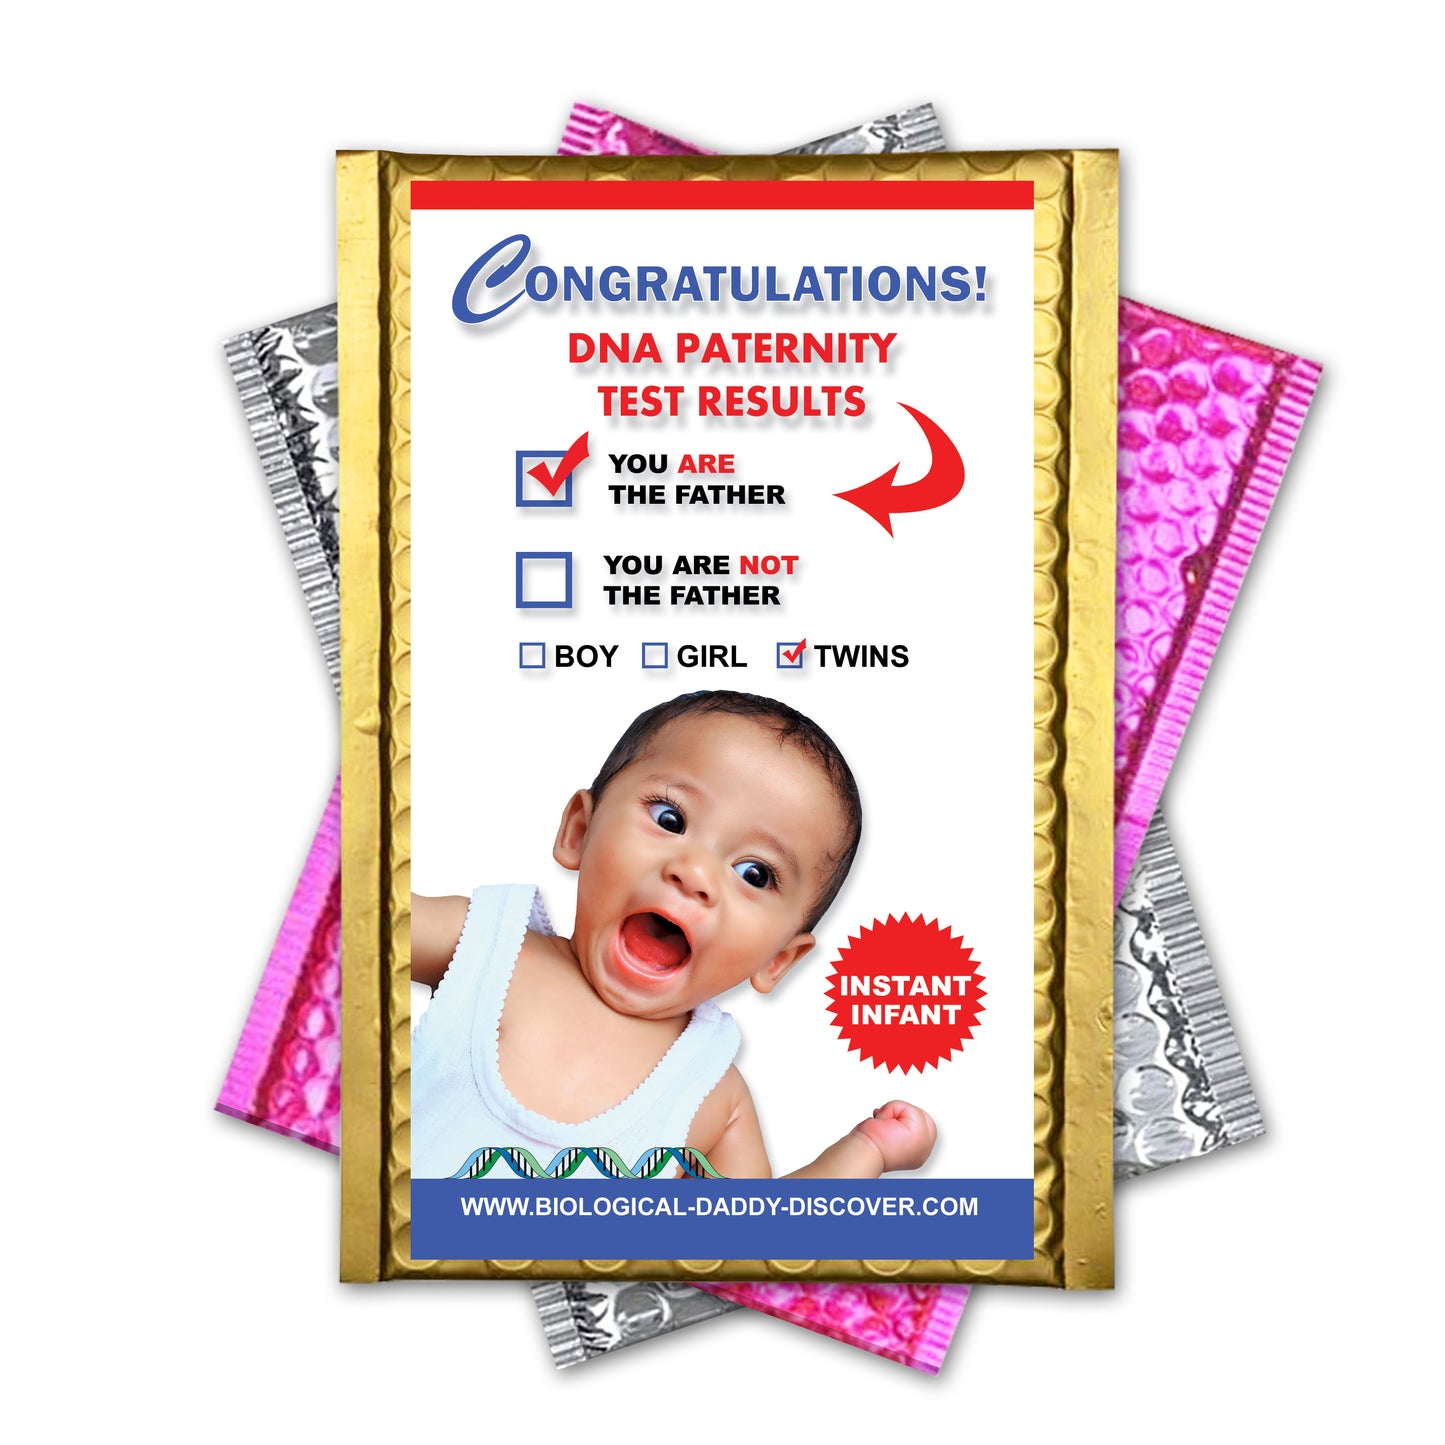 Congratulations! You Are The Father embarrassing prank envelope